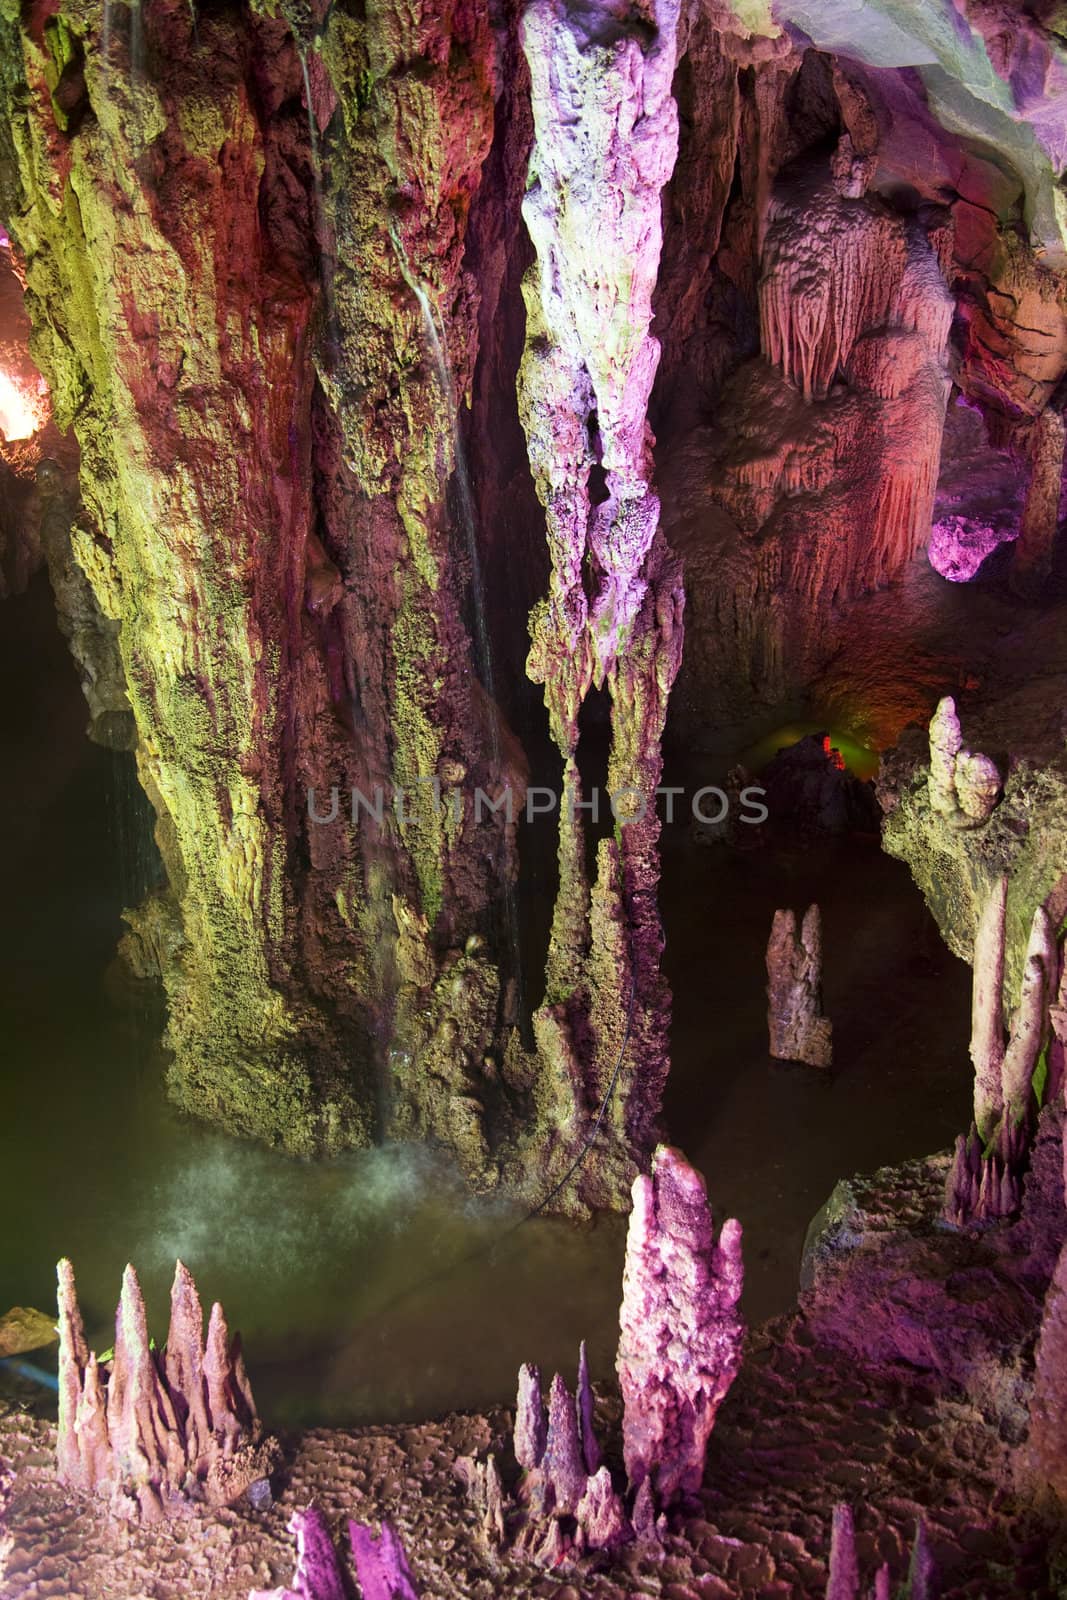 Stalactite and Stalagmite Formations  by shariffc